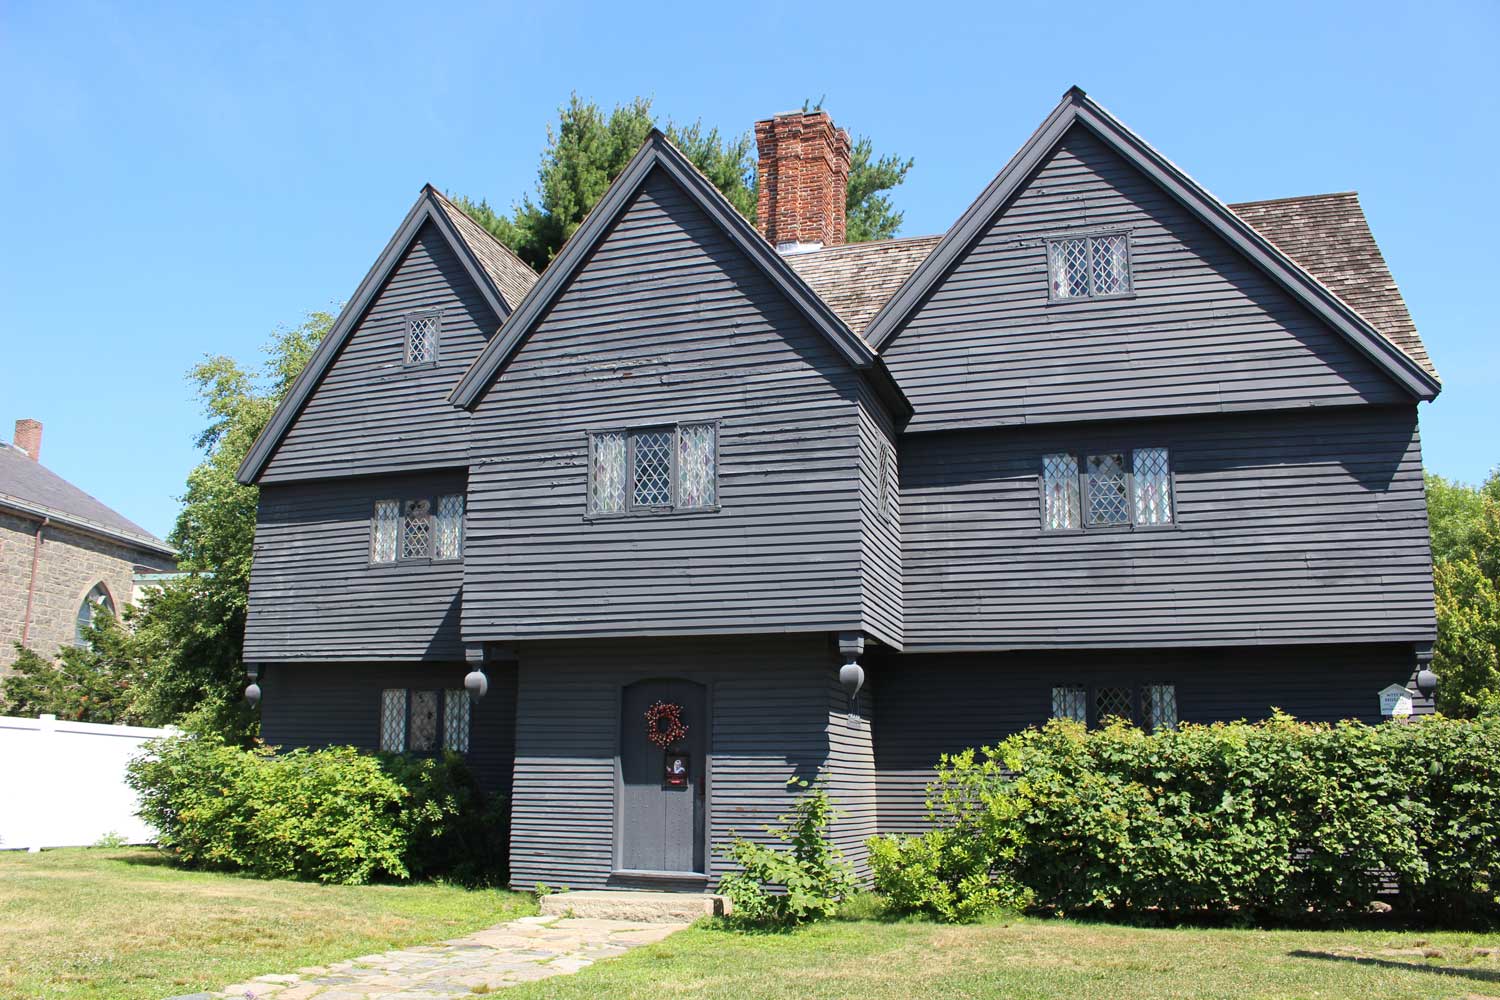 Top Ten Most Haunted Places in Salem, MA Salem Ghosts